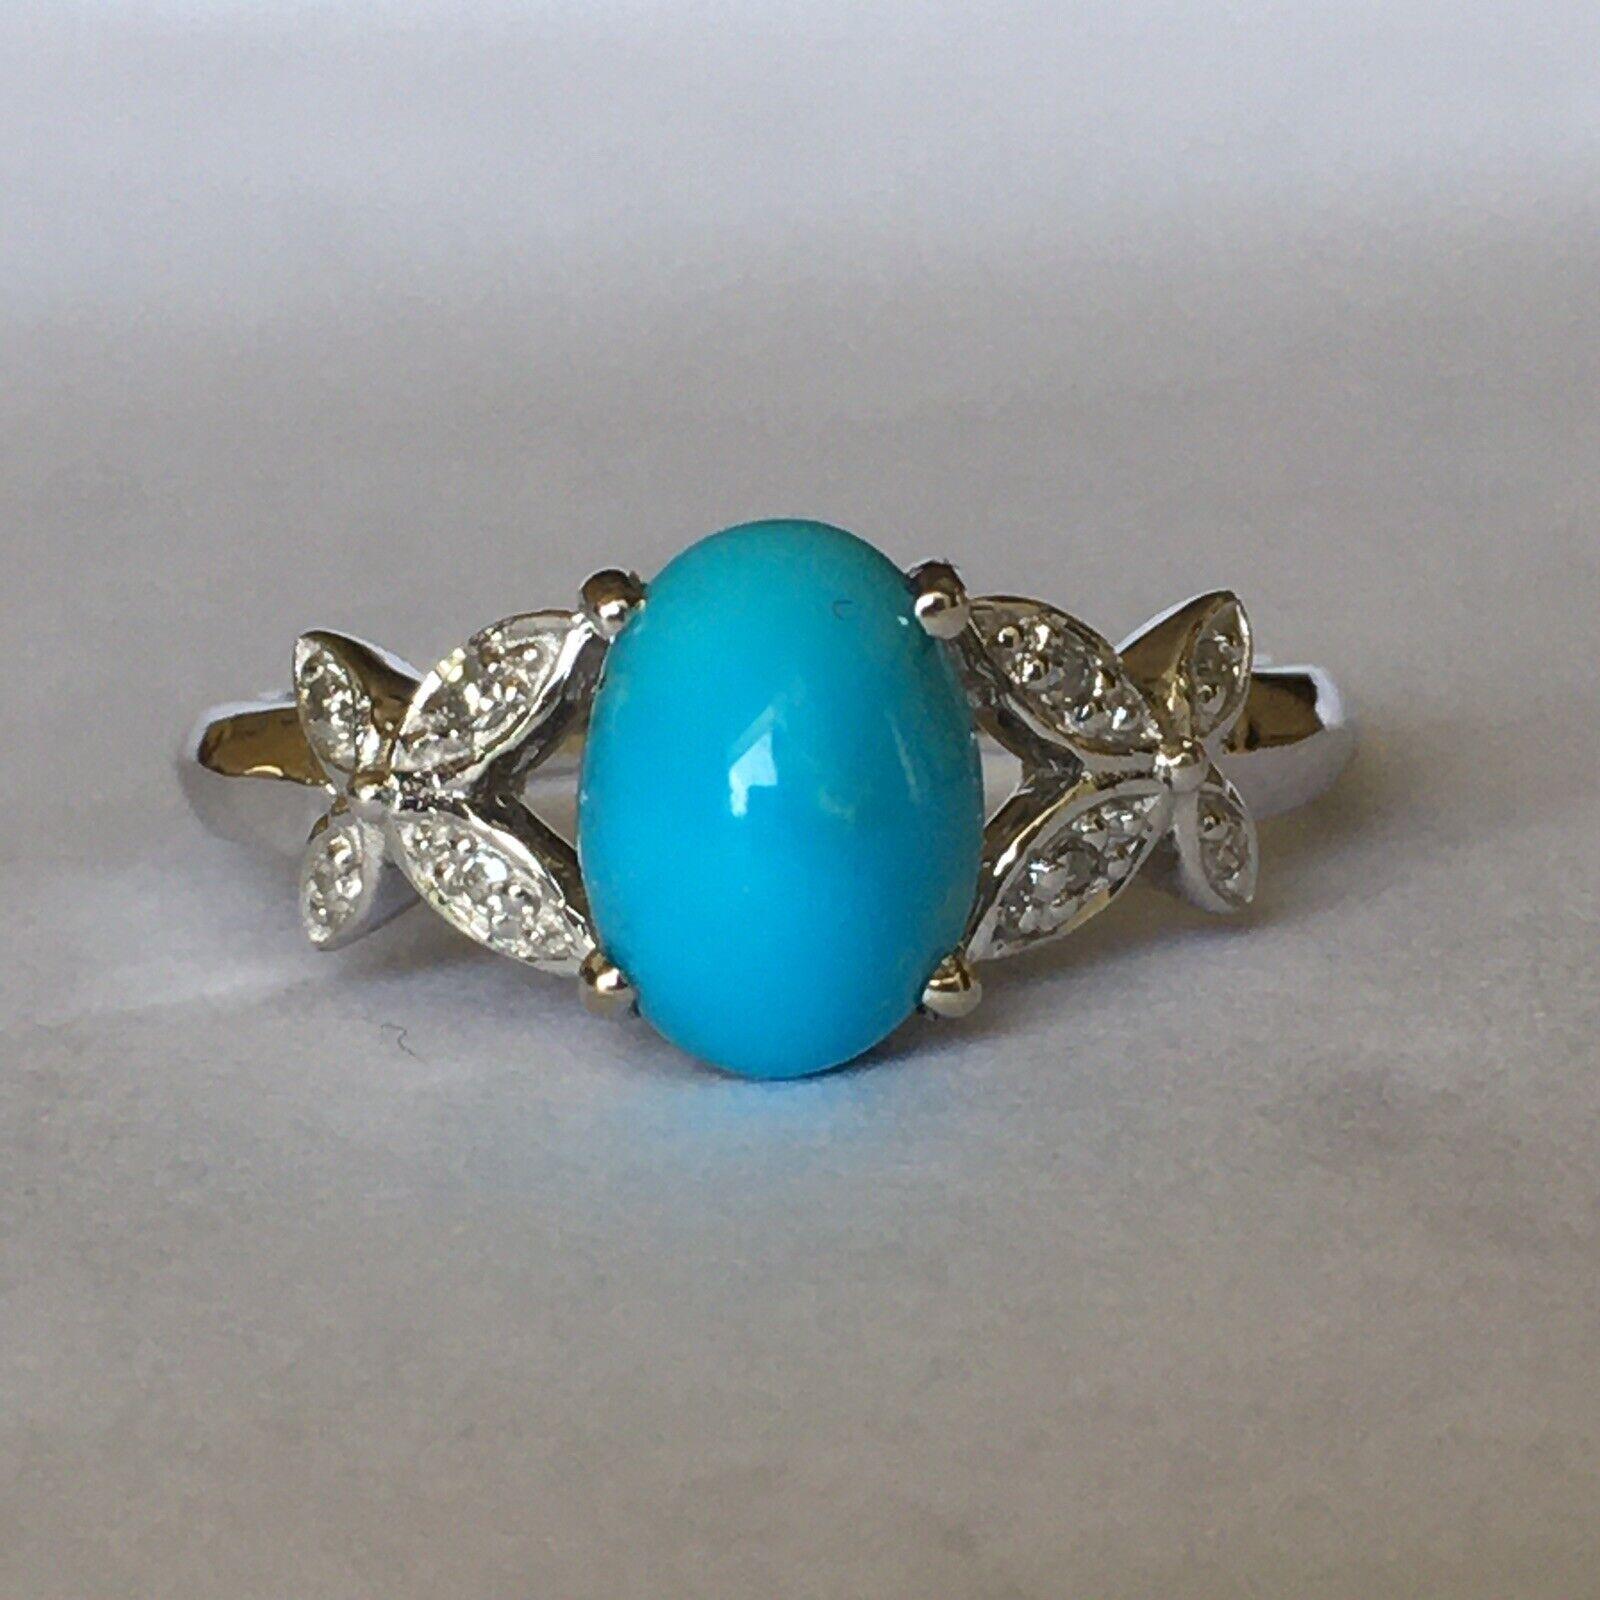 Cabochon 14 Karat White Gold Hallmarked Lady's Diamond Persian Turquoise Ring 1970s Size For Sale